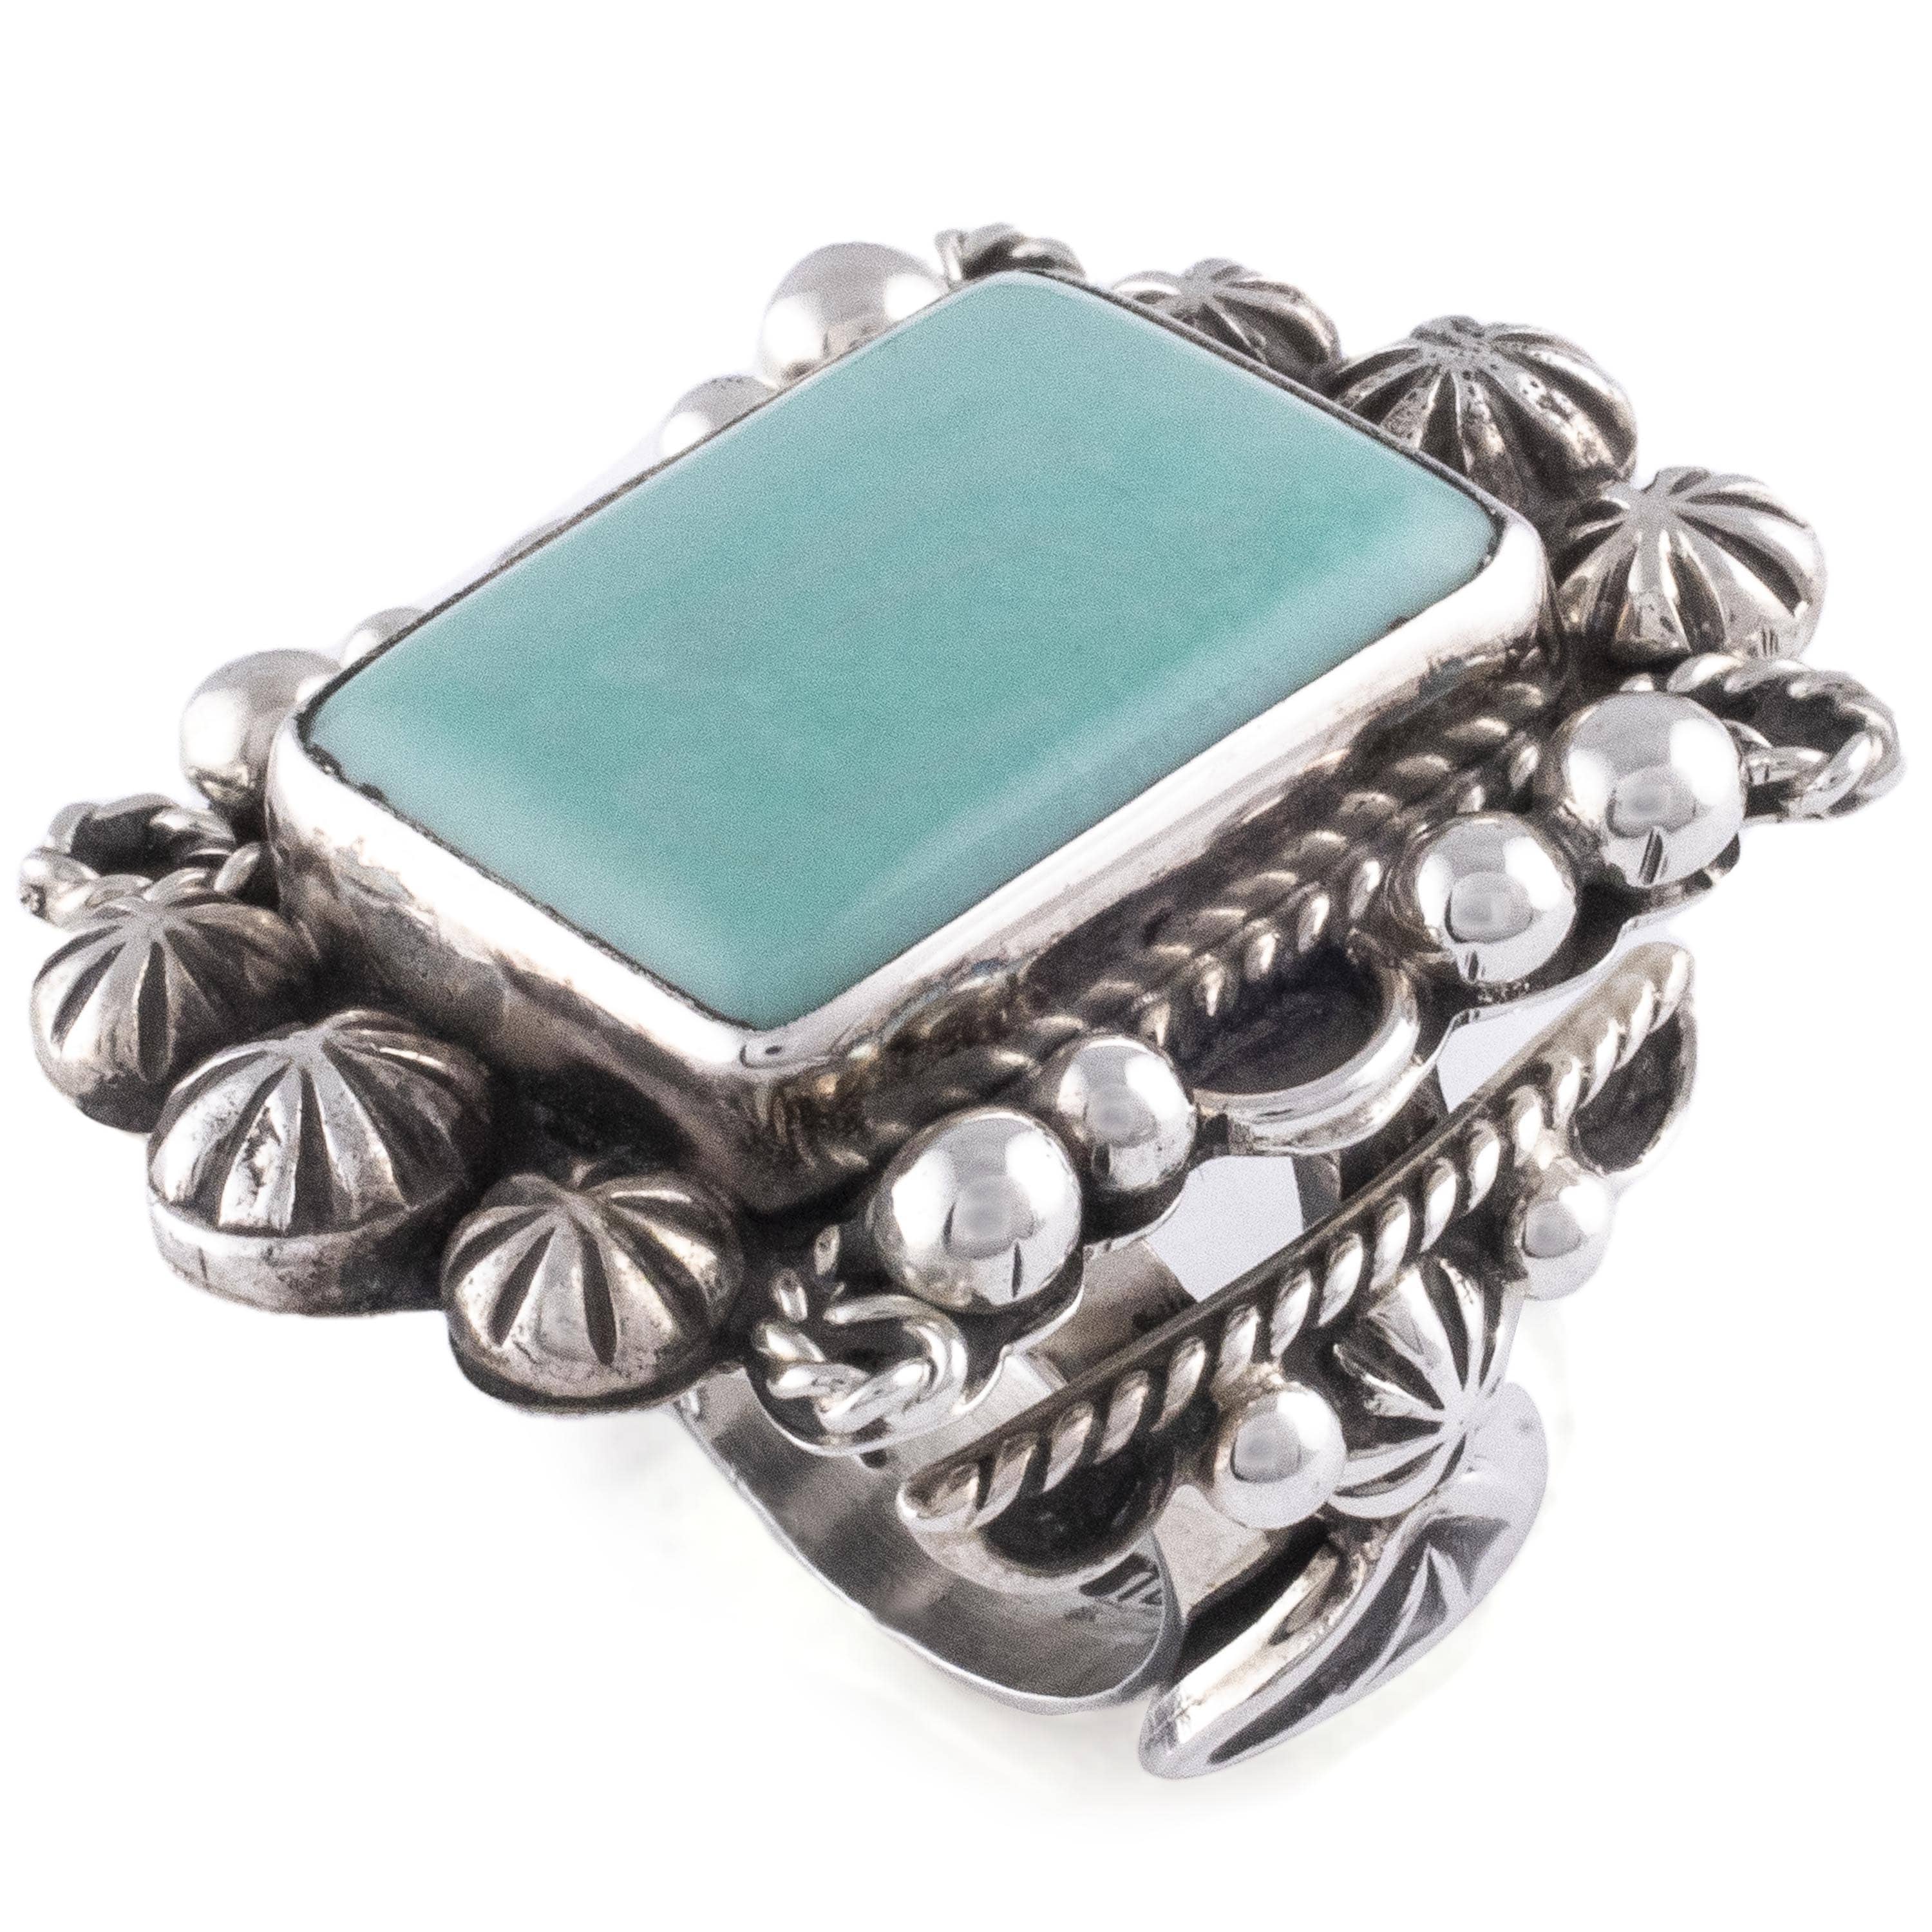 Kalifano Native American Jewelry 5 Ronald Tom Navajo Campitos Turquoise USA Native American Made 925 Sterling Silver Ring NAR400.095.5